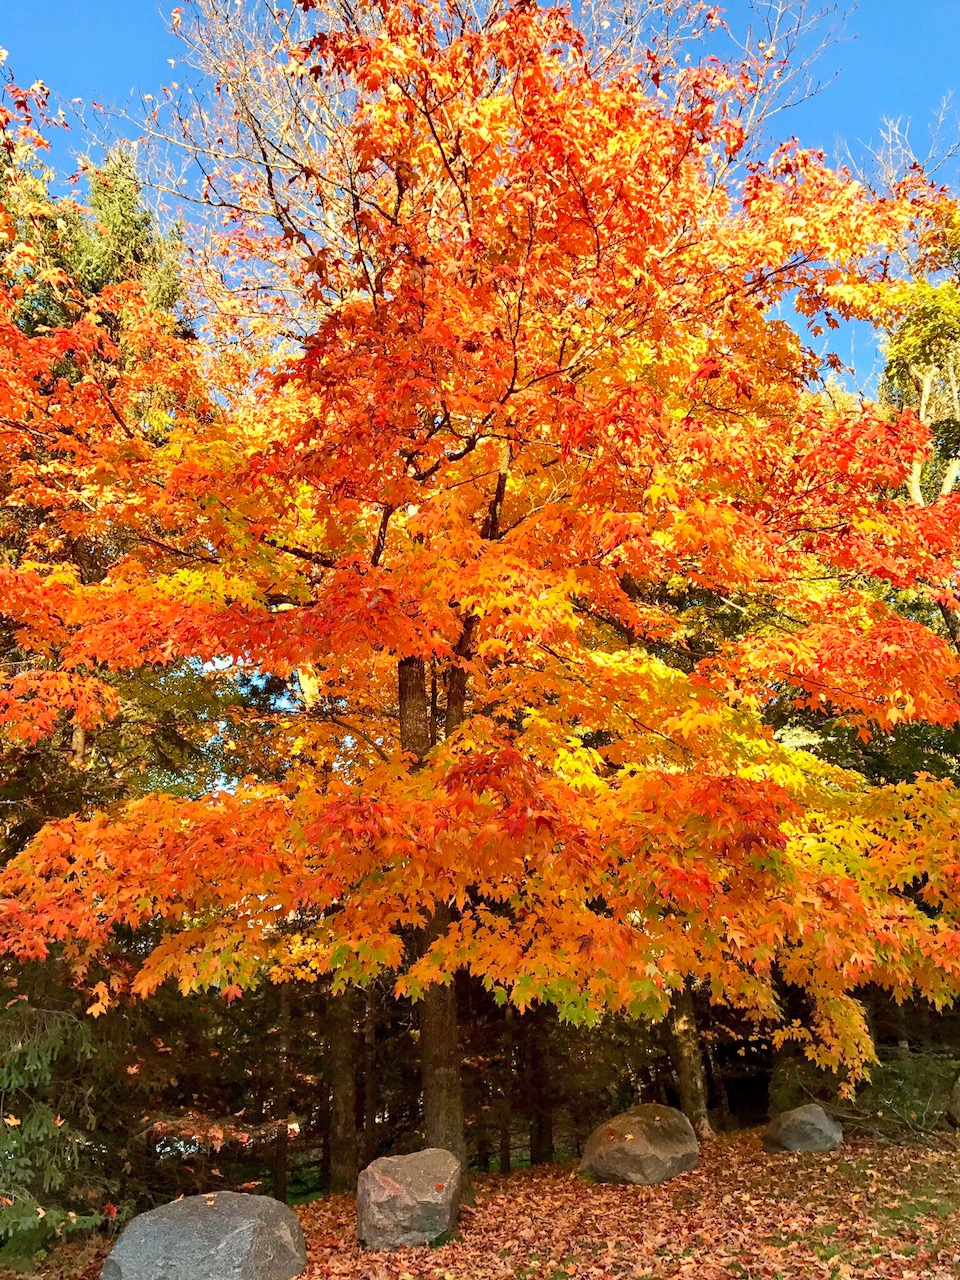 Maple tree near Brant cabin displaying brilliant fall color. September 29th, 2017.